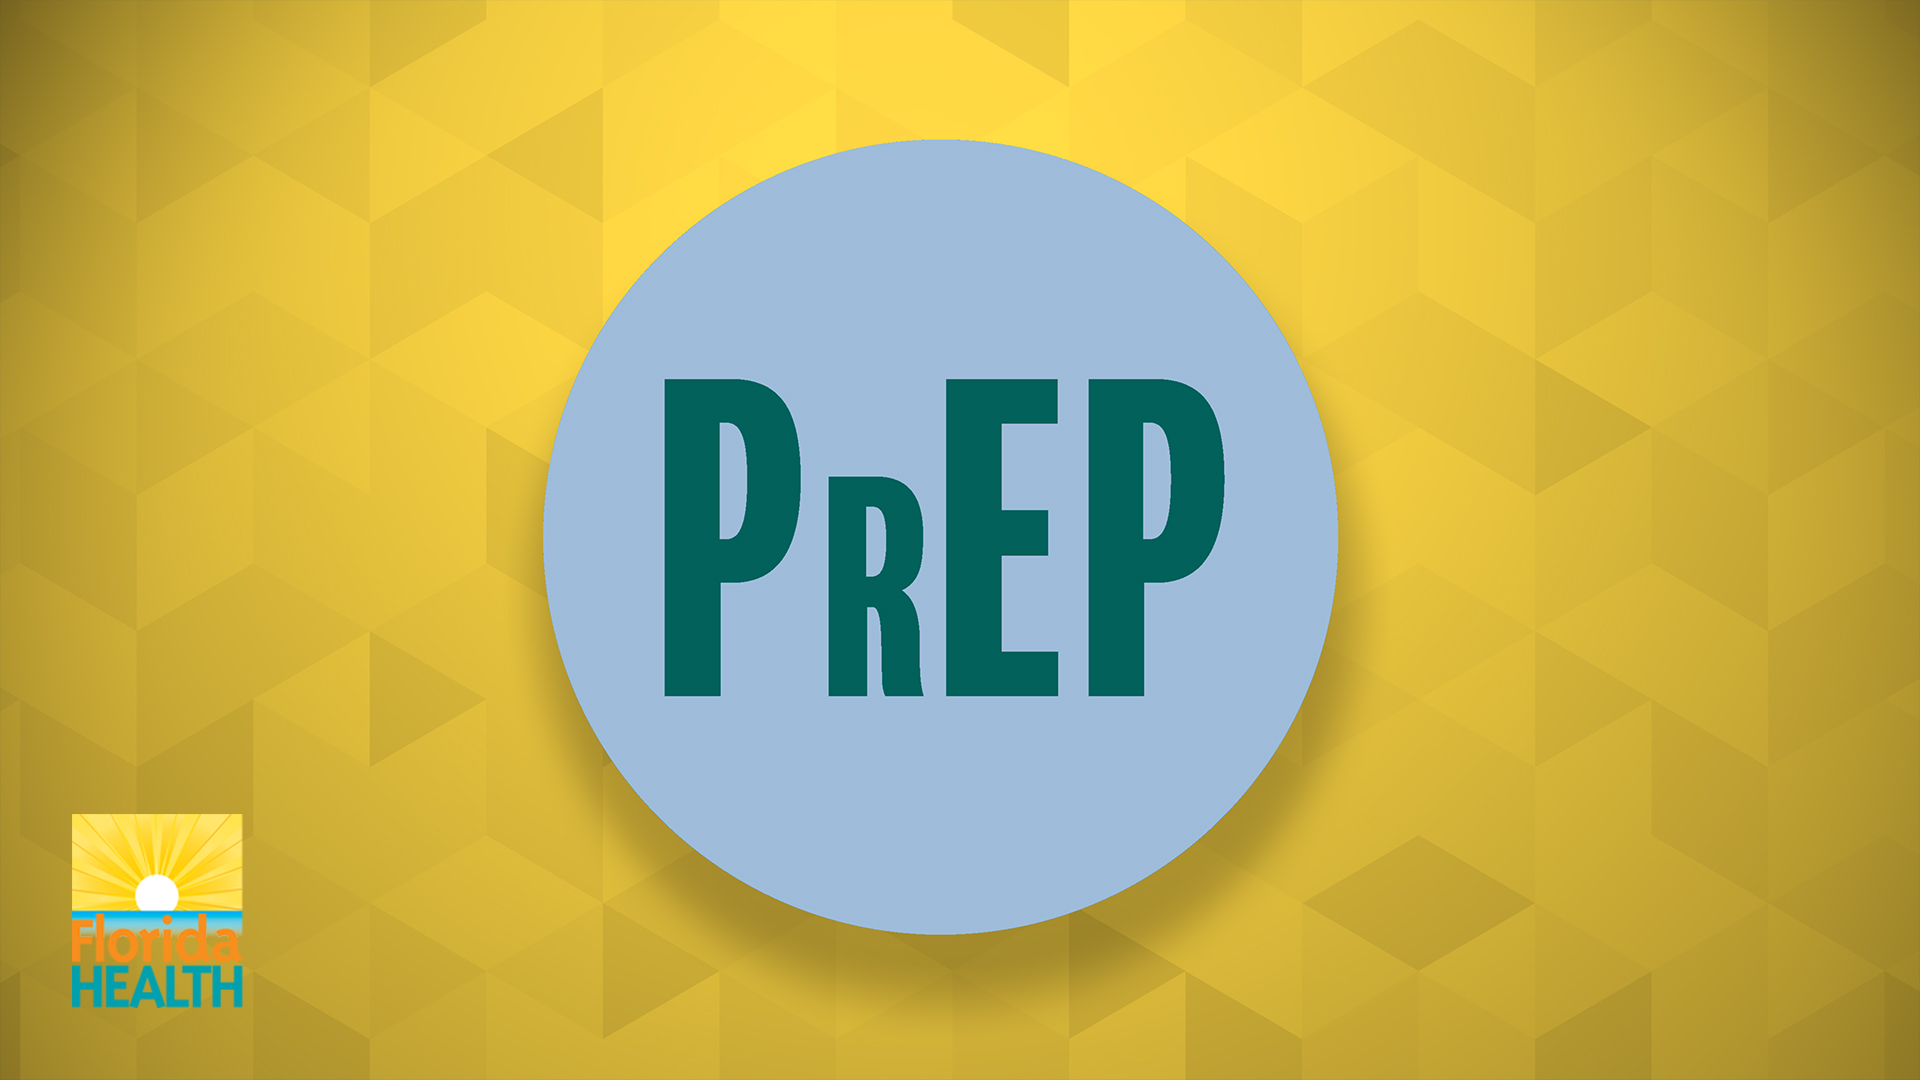 the HIV Prep and Pep toolkit does not have an image associated with it, a blank white image is a default place holder.